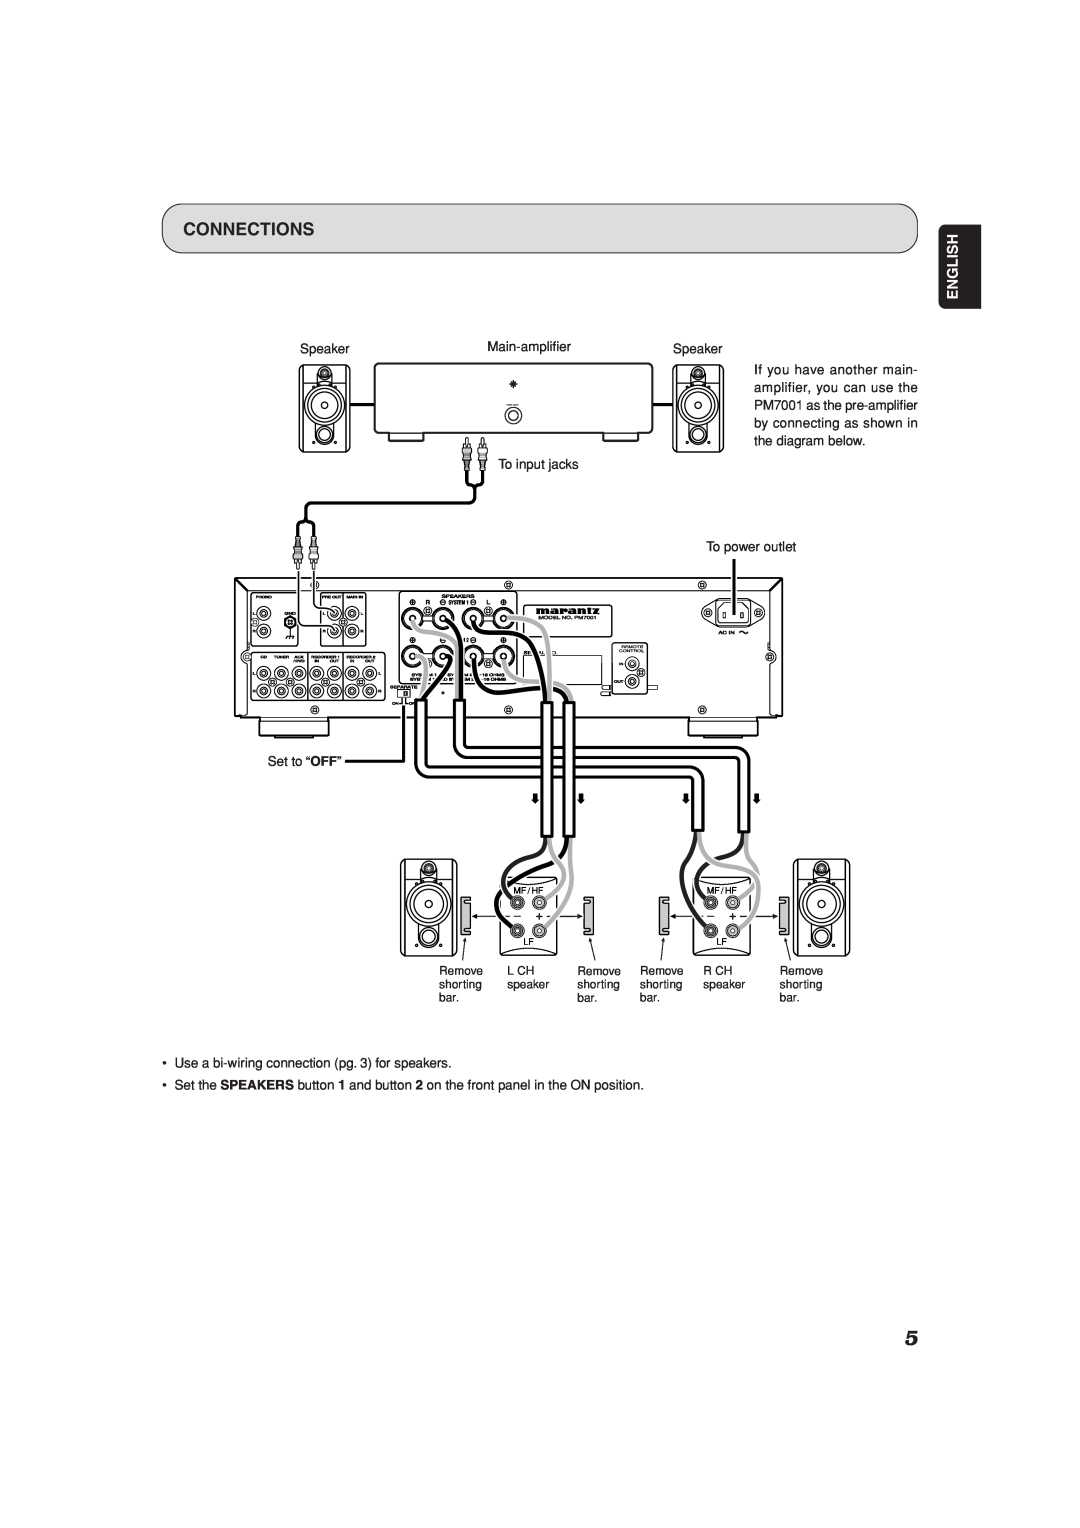 Marantz PM7001 manual Connections, English, Speaker, Main-amplifier, To input jacks, To power outlet, Set to “OFF” 